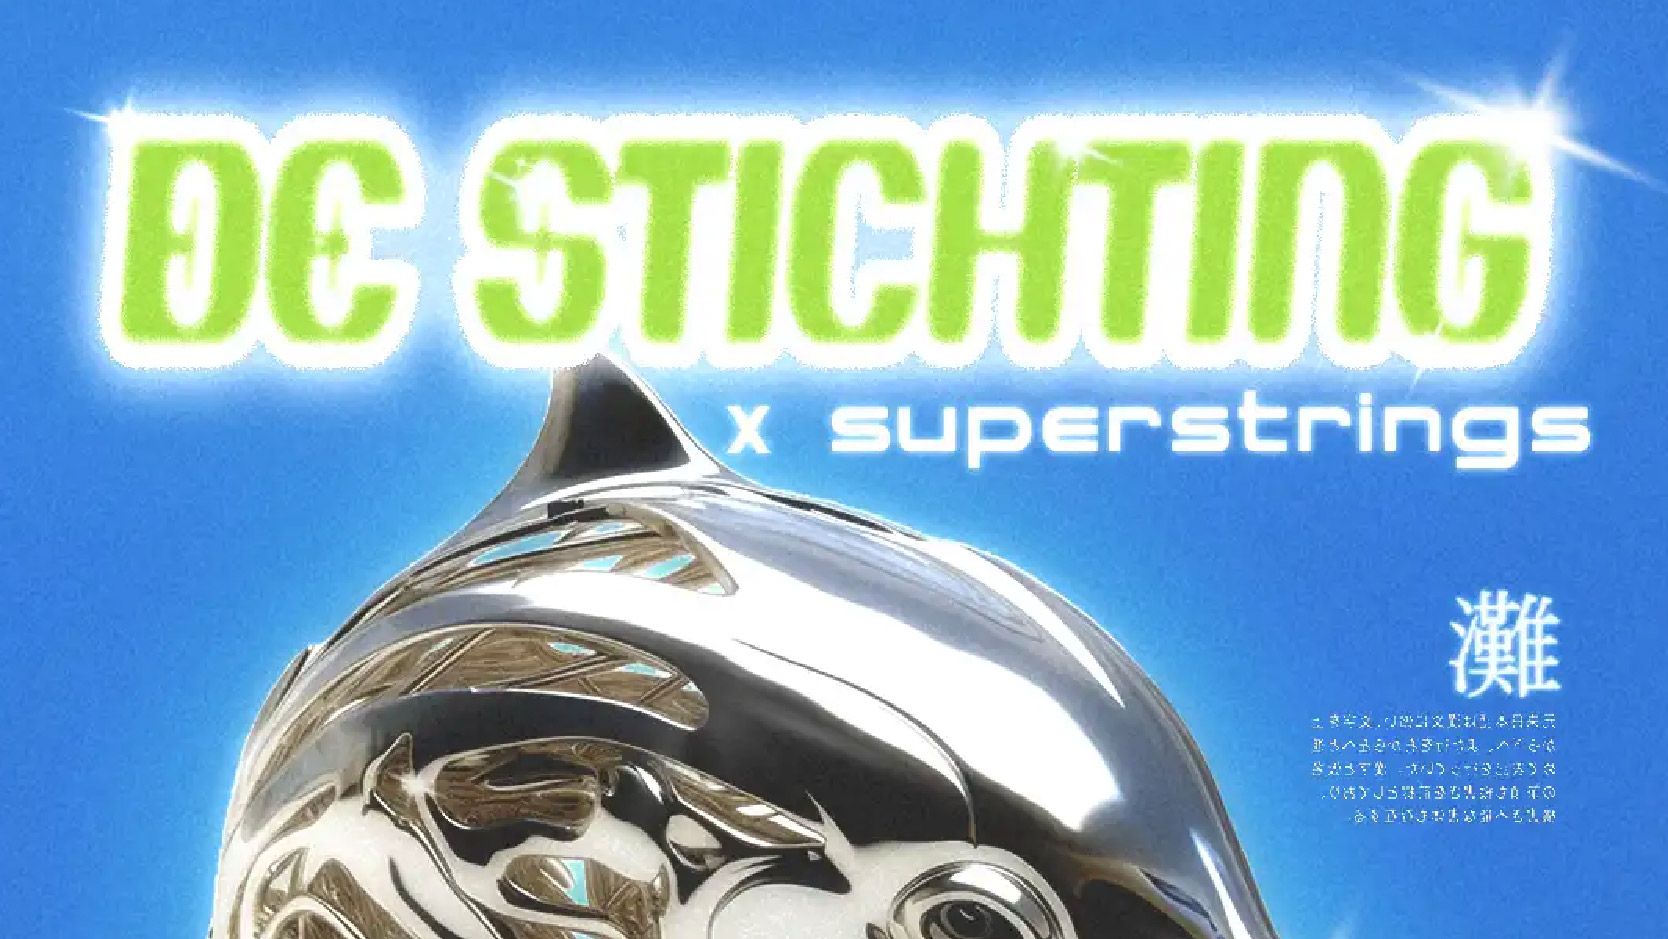 De Stichting x Superstrings by Night cover